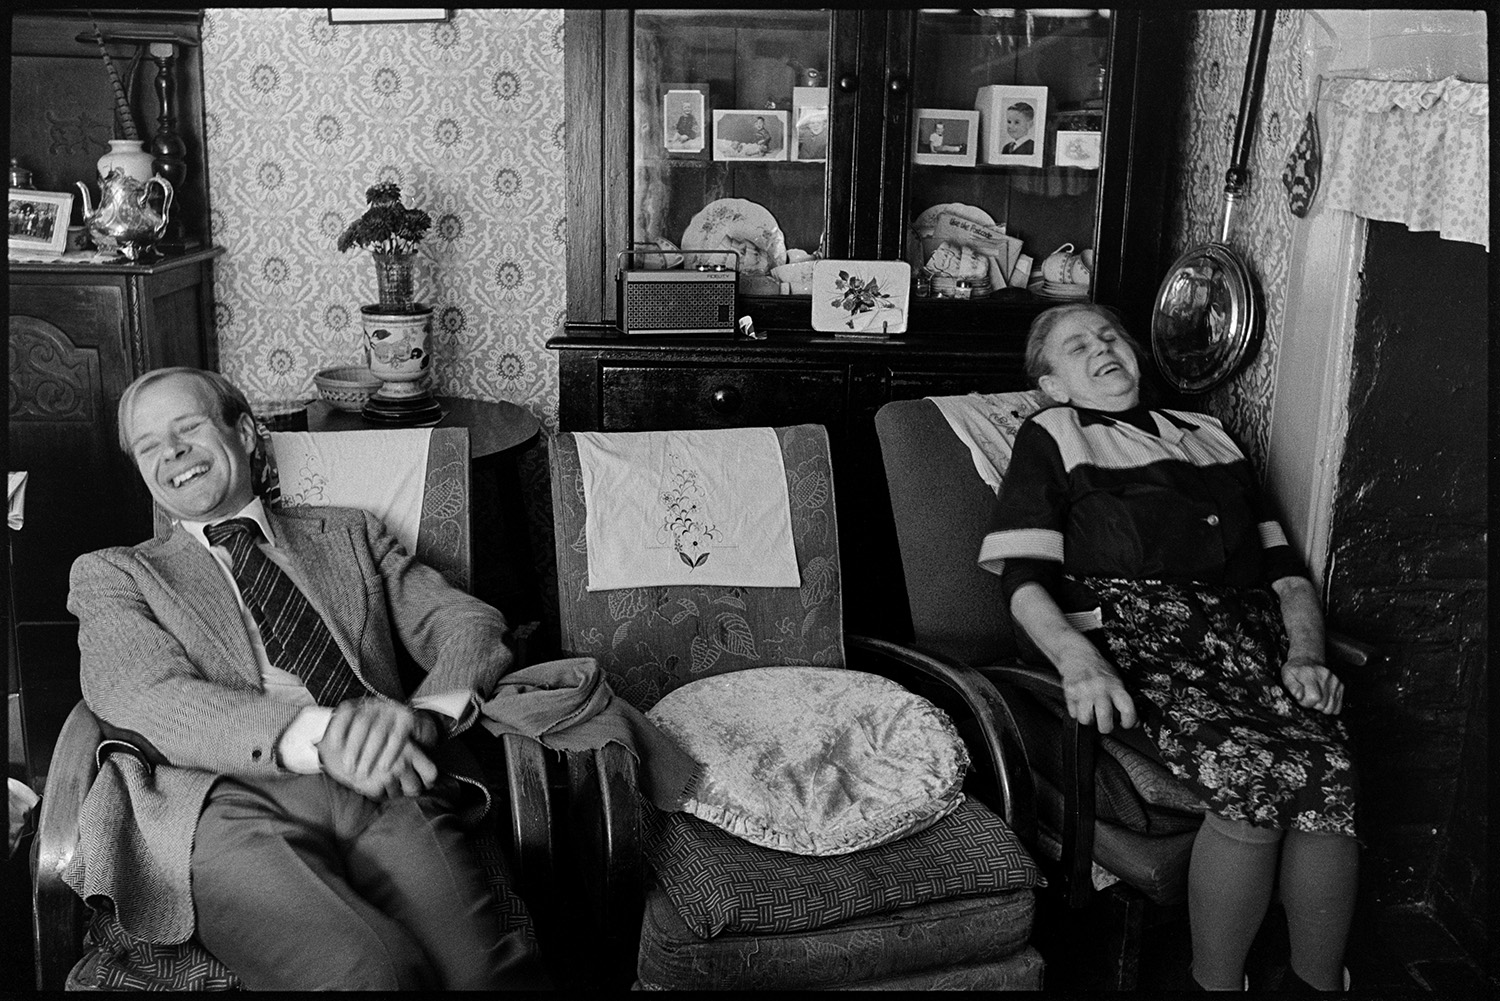 Doctor visiting woman patient, chatting in front of fireplace. Easy chairs and dresser, bellows. 
[Doctor Richard Westcott visiting a woman in her home at Mariansleigh. They are sat on chair in her living room and laughing. Photographs and china are displayed in a dresser behind them. A radio is also on the dresser. A fireplace and bed warmer hung on the wall are also visible. The wall is covered with patterned wallpaper.]